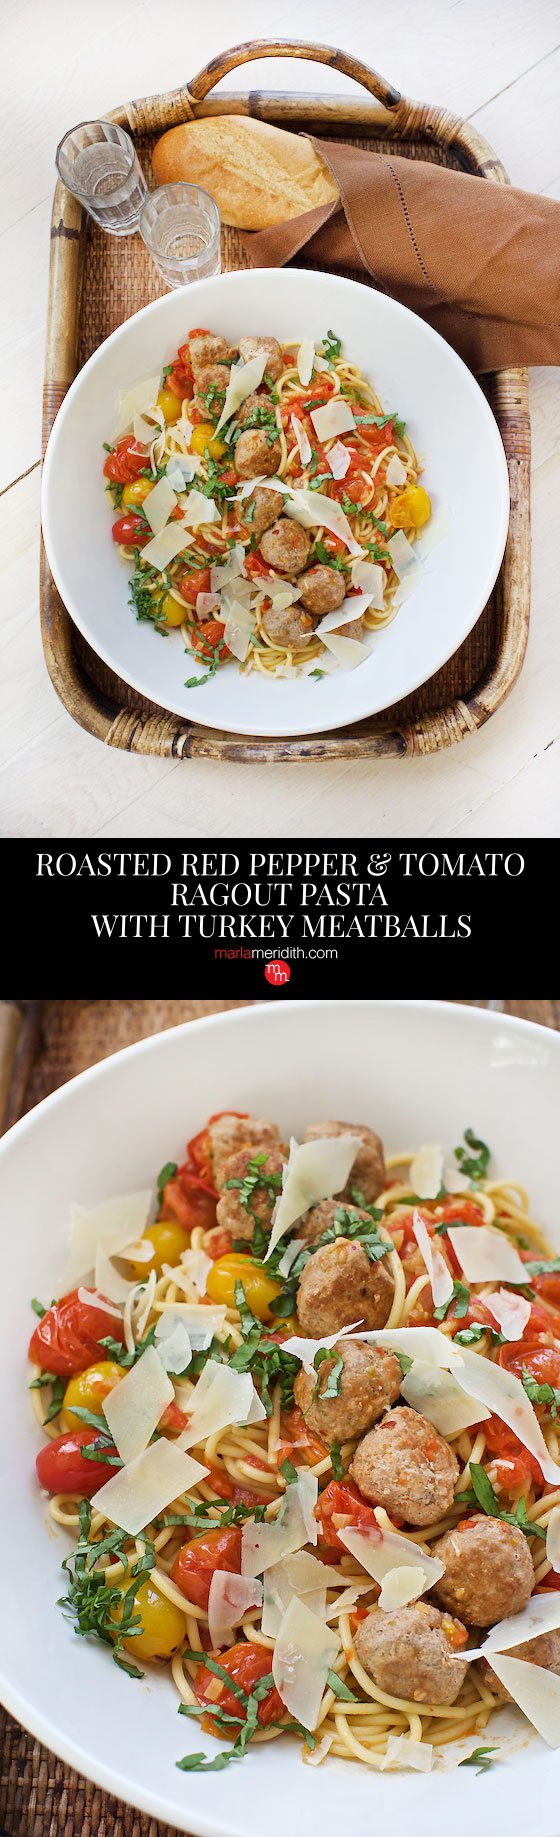 Roasted Pepper & Tomato Ragout Pasta with Turkey Meatballs #recipe Your family will LOVE this! MarlaMeridith.com ( @marlameridith )